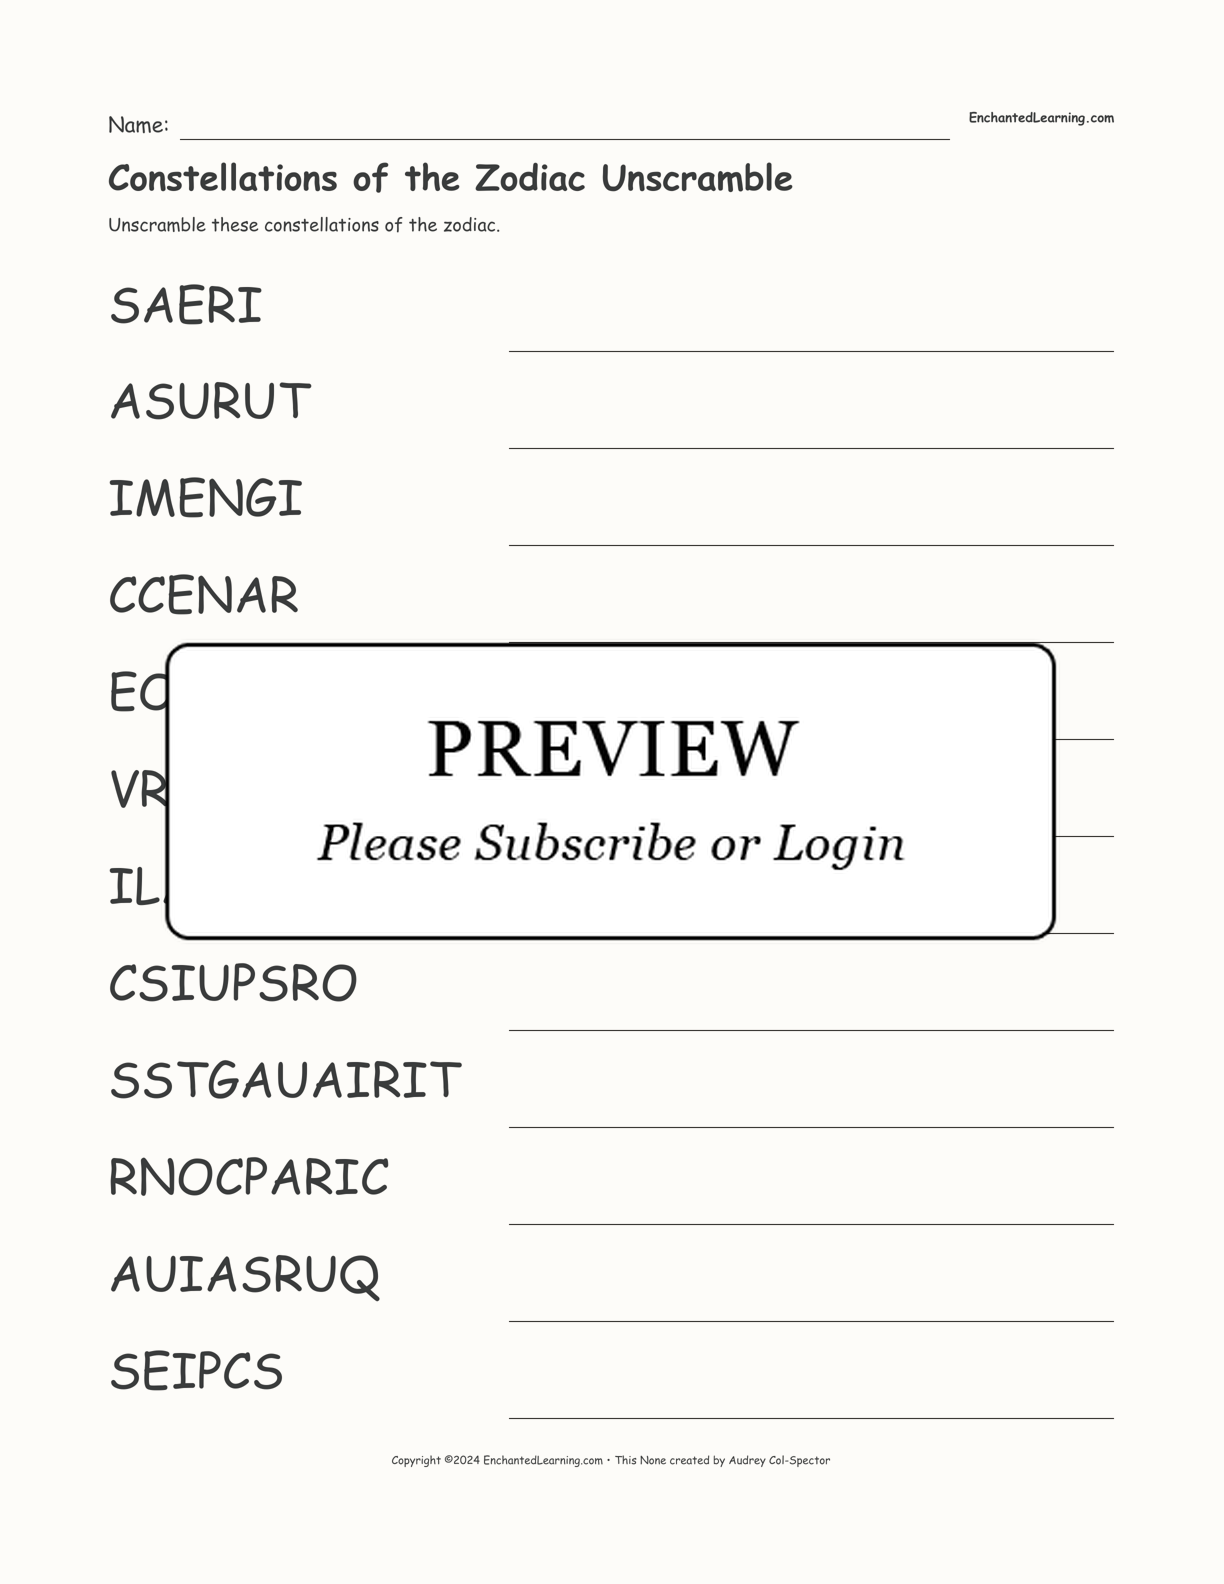 Constellations of the Zodiac Unscramble interactive worksheet page 1